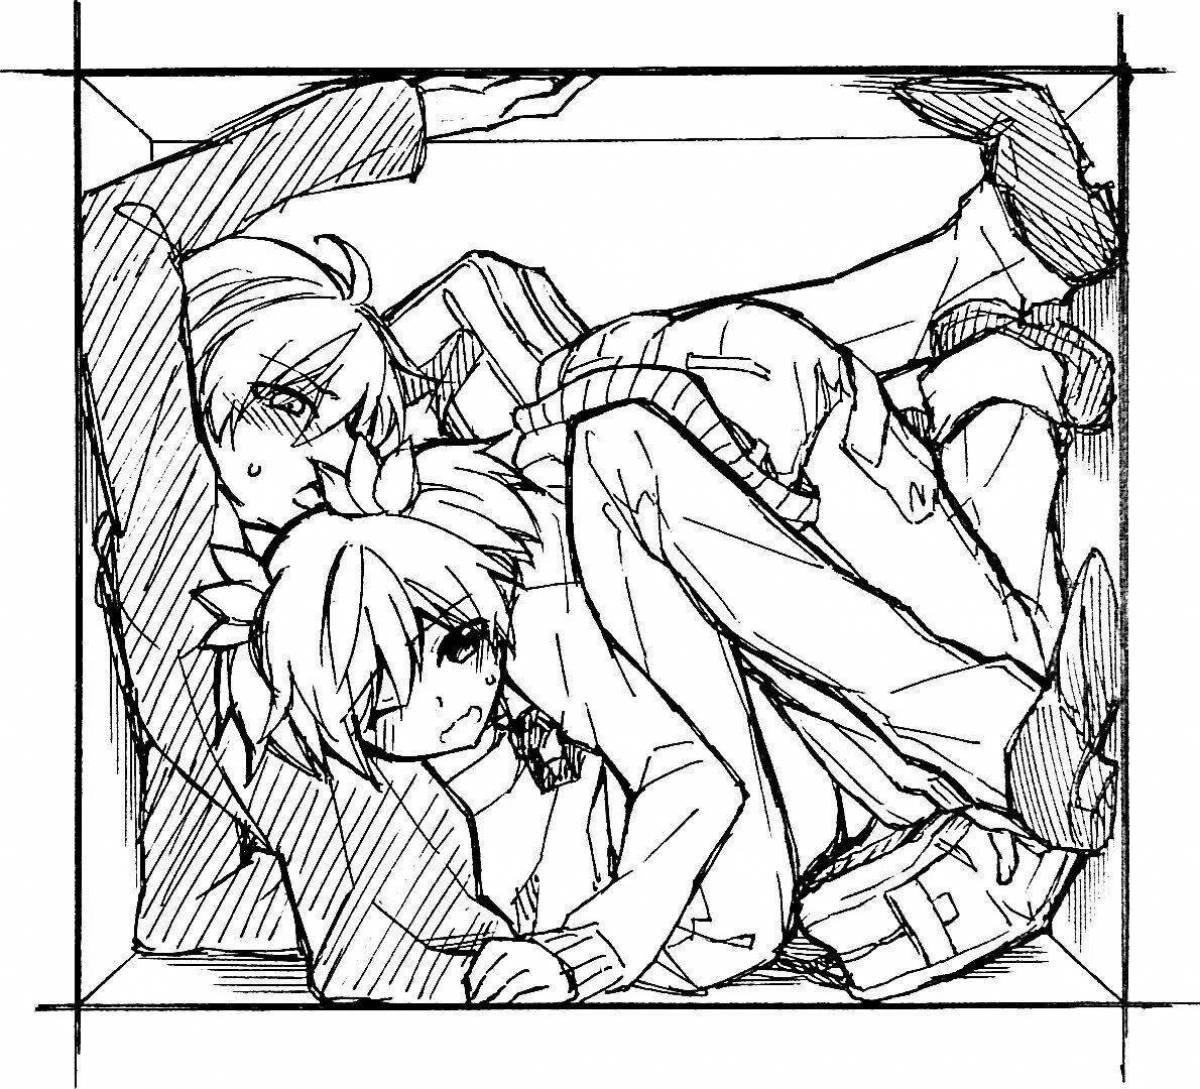 Exquisite yaoi anime coloring book